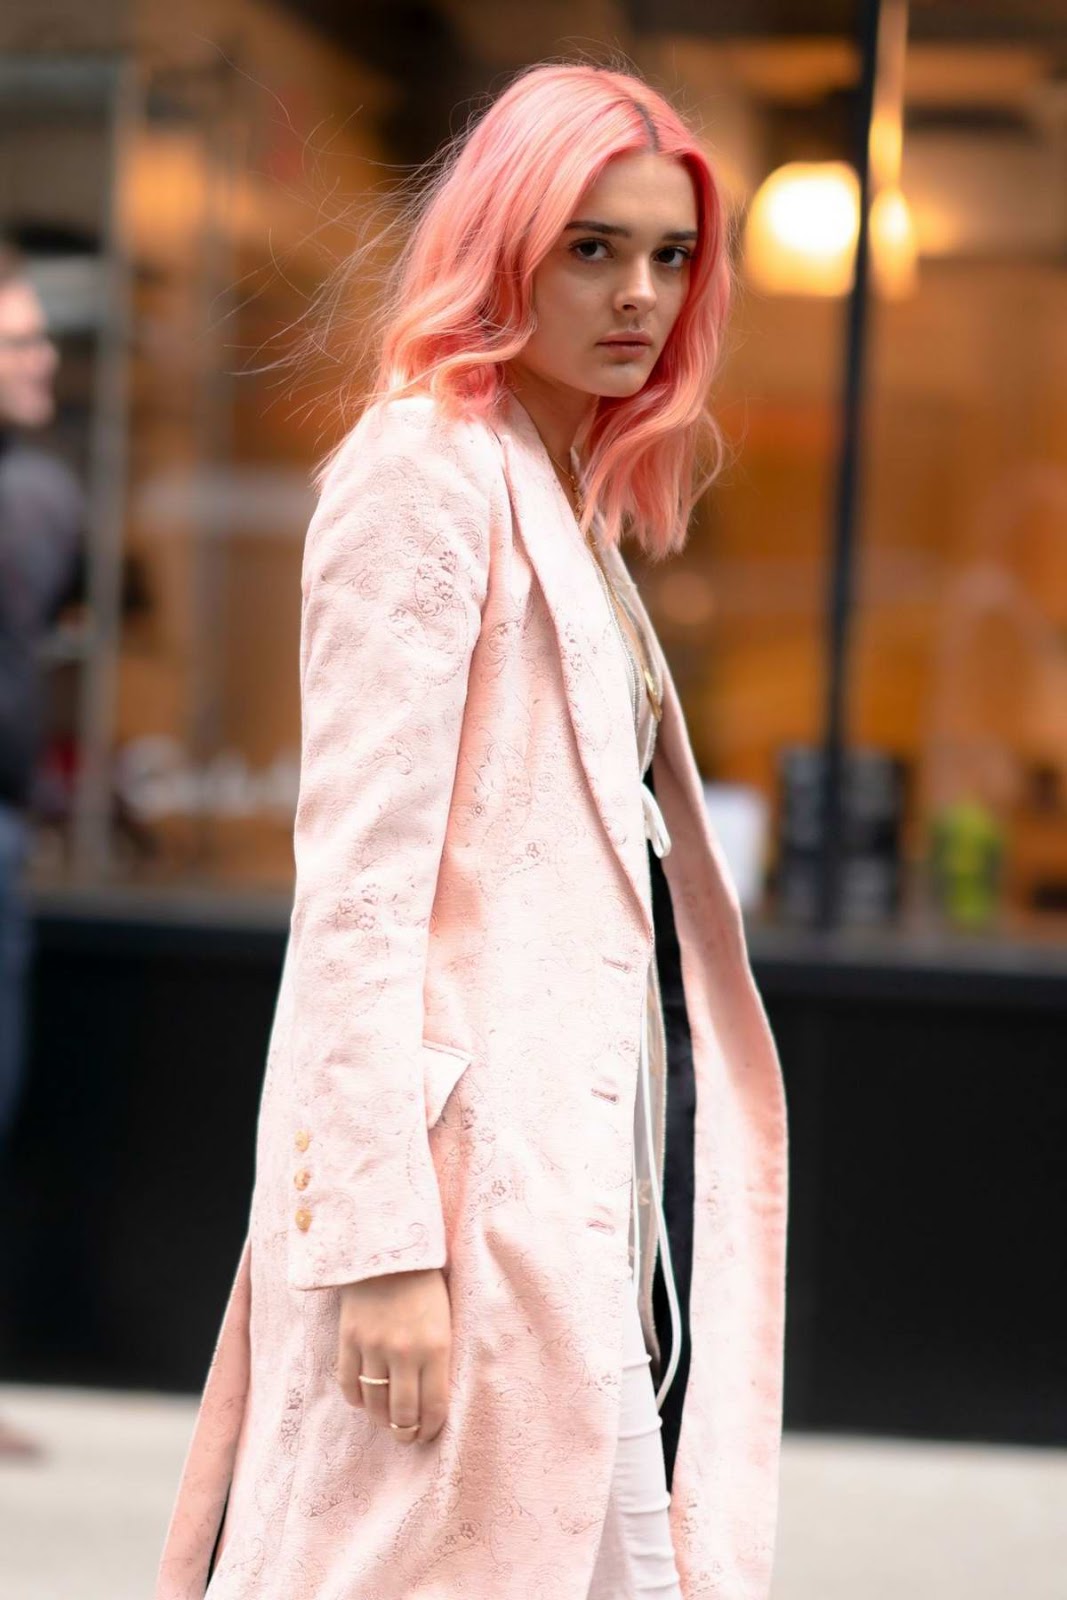 Charlotte Lawrence in Pink Ensemble Street Style Outfit in New York City